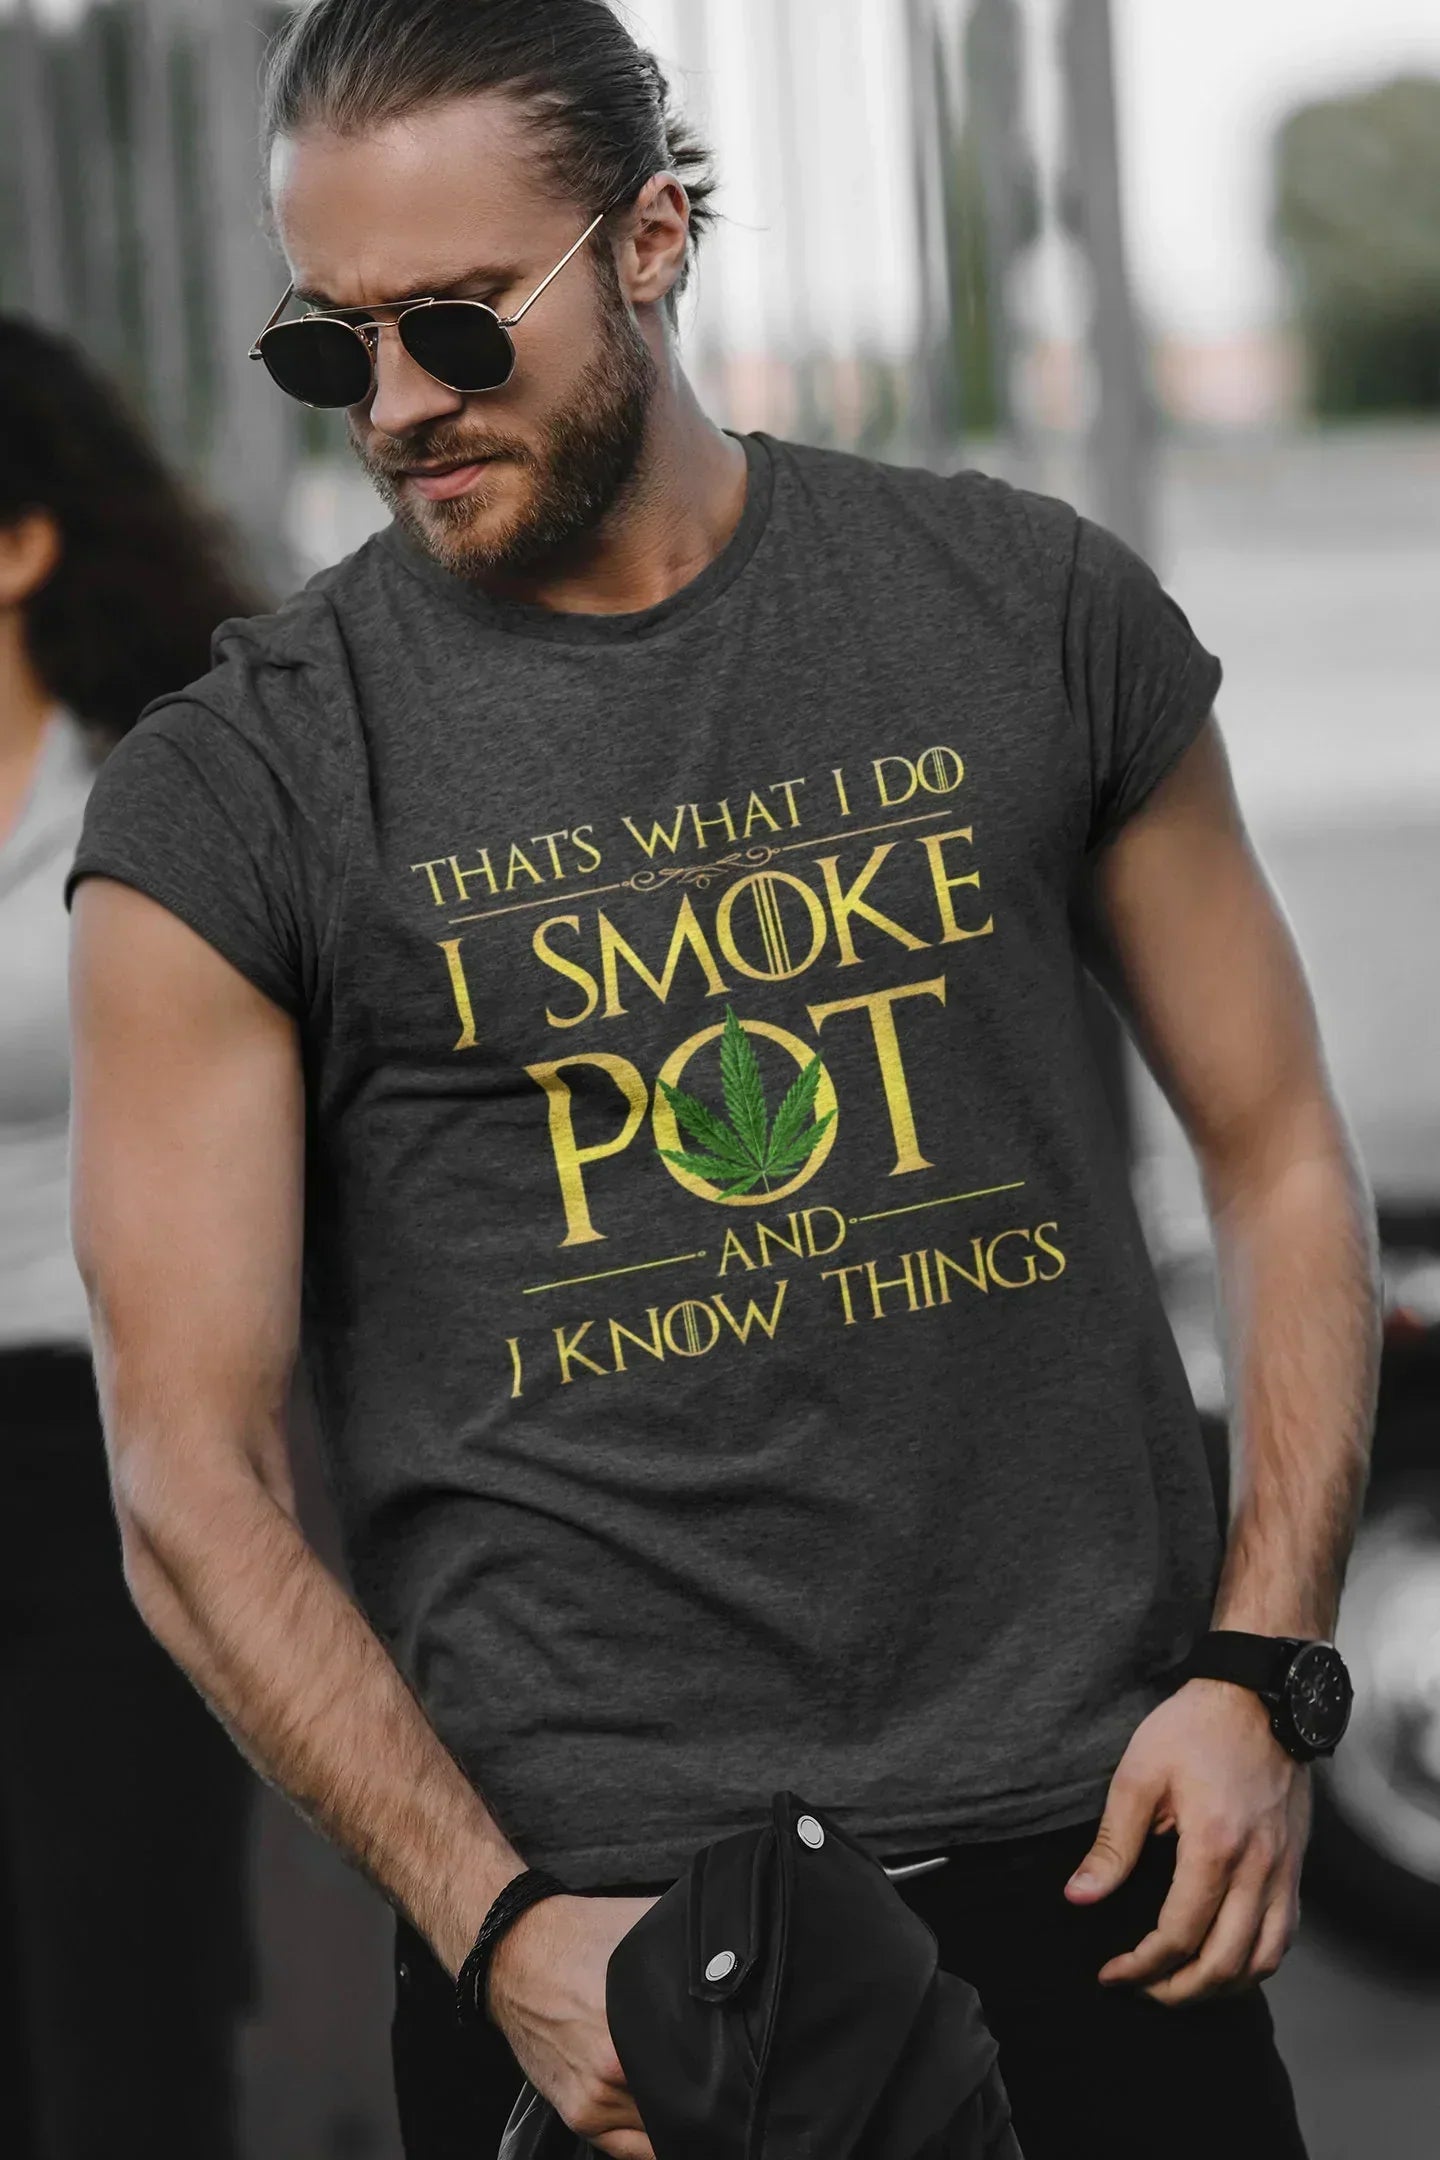 Hippie Clothes, Stoner Gifts, Weed Gifts, Weed Shirt, Stoner Gift, Stoner Girl, Stoner Gift for Him, Stoner Gift for Her, Marijuana T shirts